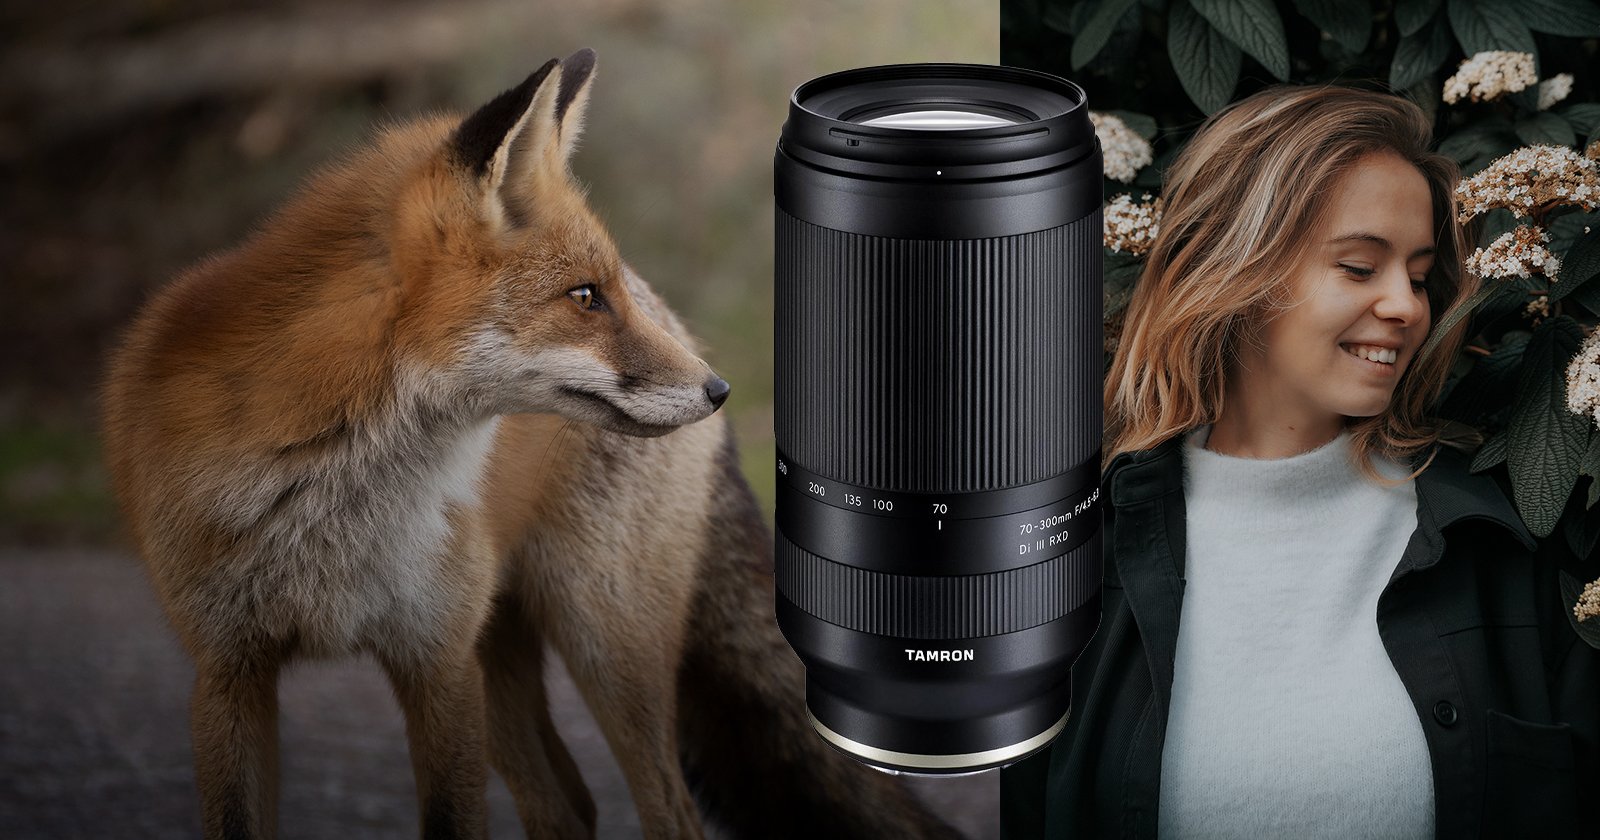 Hands On with the Tamron 70-300mm f/4.5-6.3 Di III RXD for Sony E